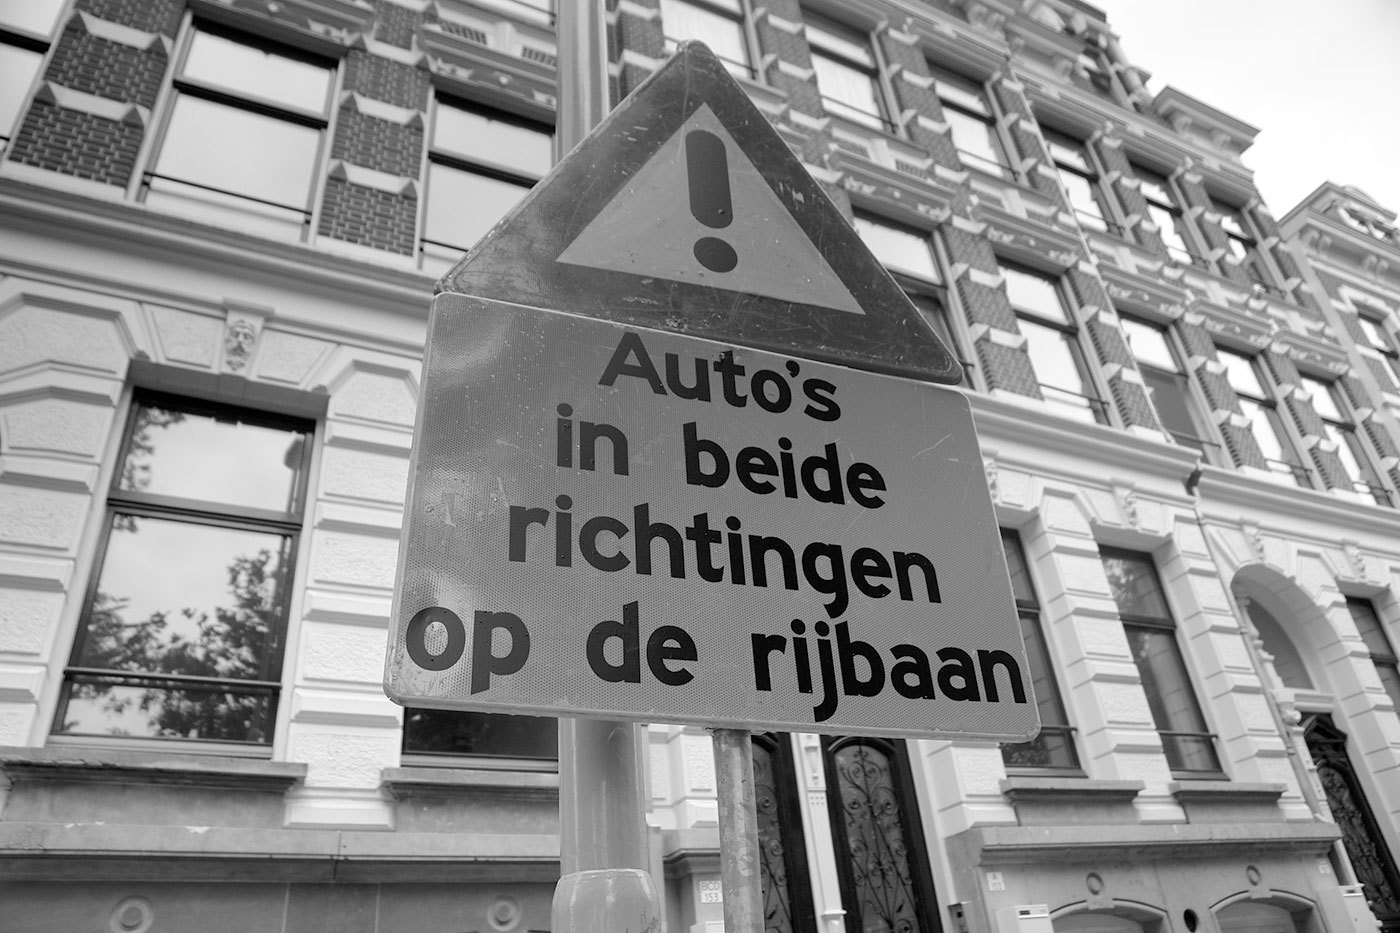 More information about "Traffic Sign Typefaces: The Netherlands"